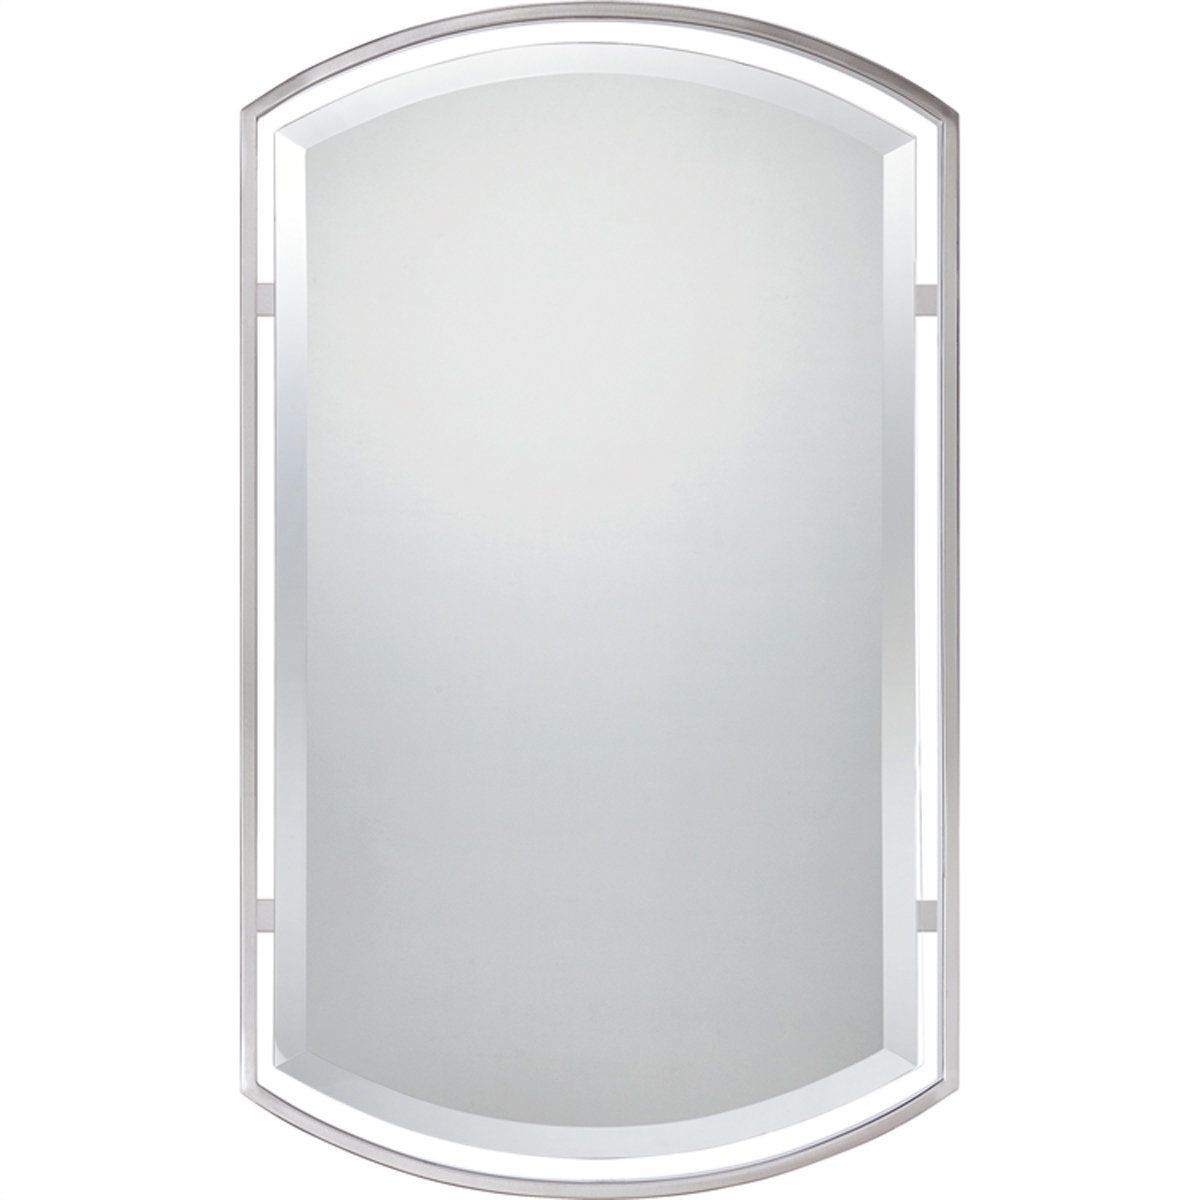 Floating Frame Rounded Rectangular Mirror In 2021 | Brushed Nickel Inside Brushed Nickel Rectangular Wall Mirrors (View 11 of 15)